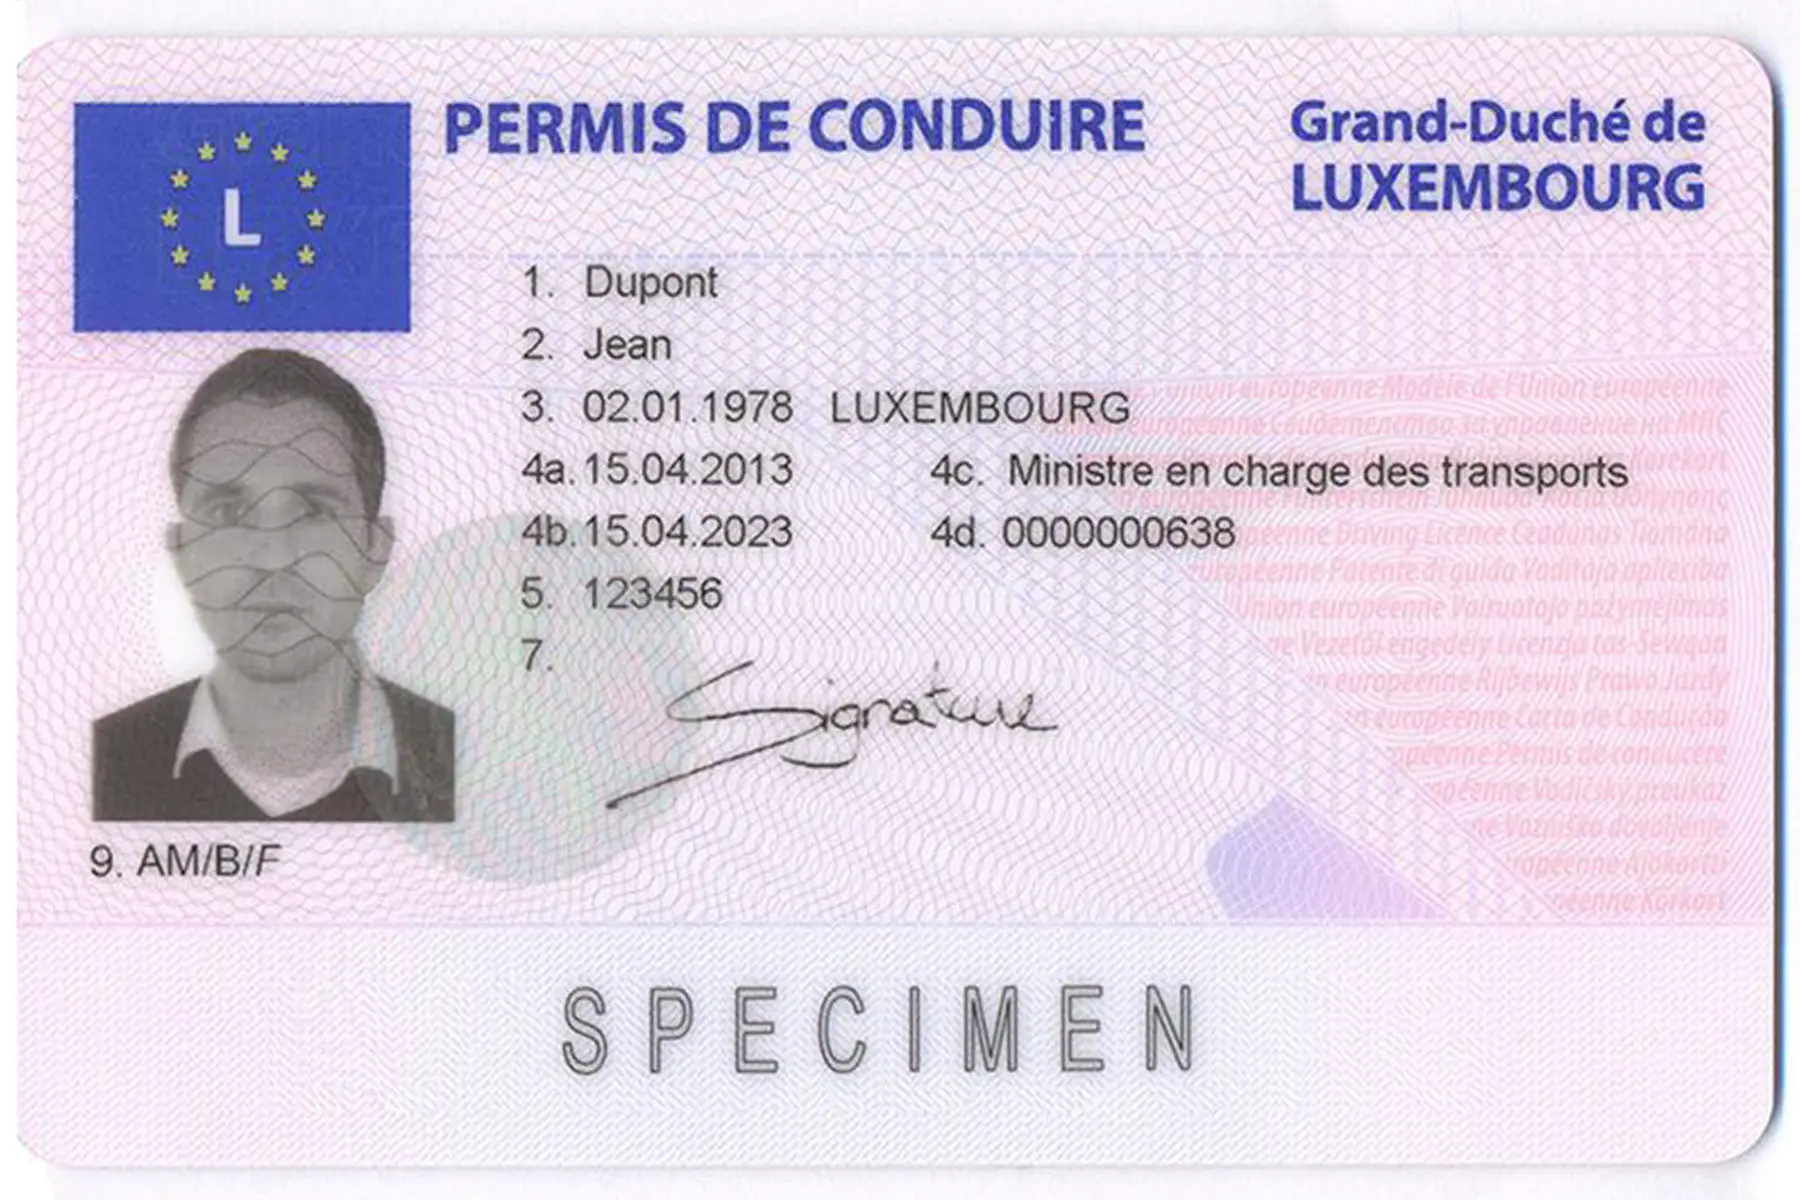 Example of a driving license from Luxembourg